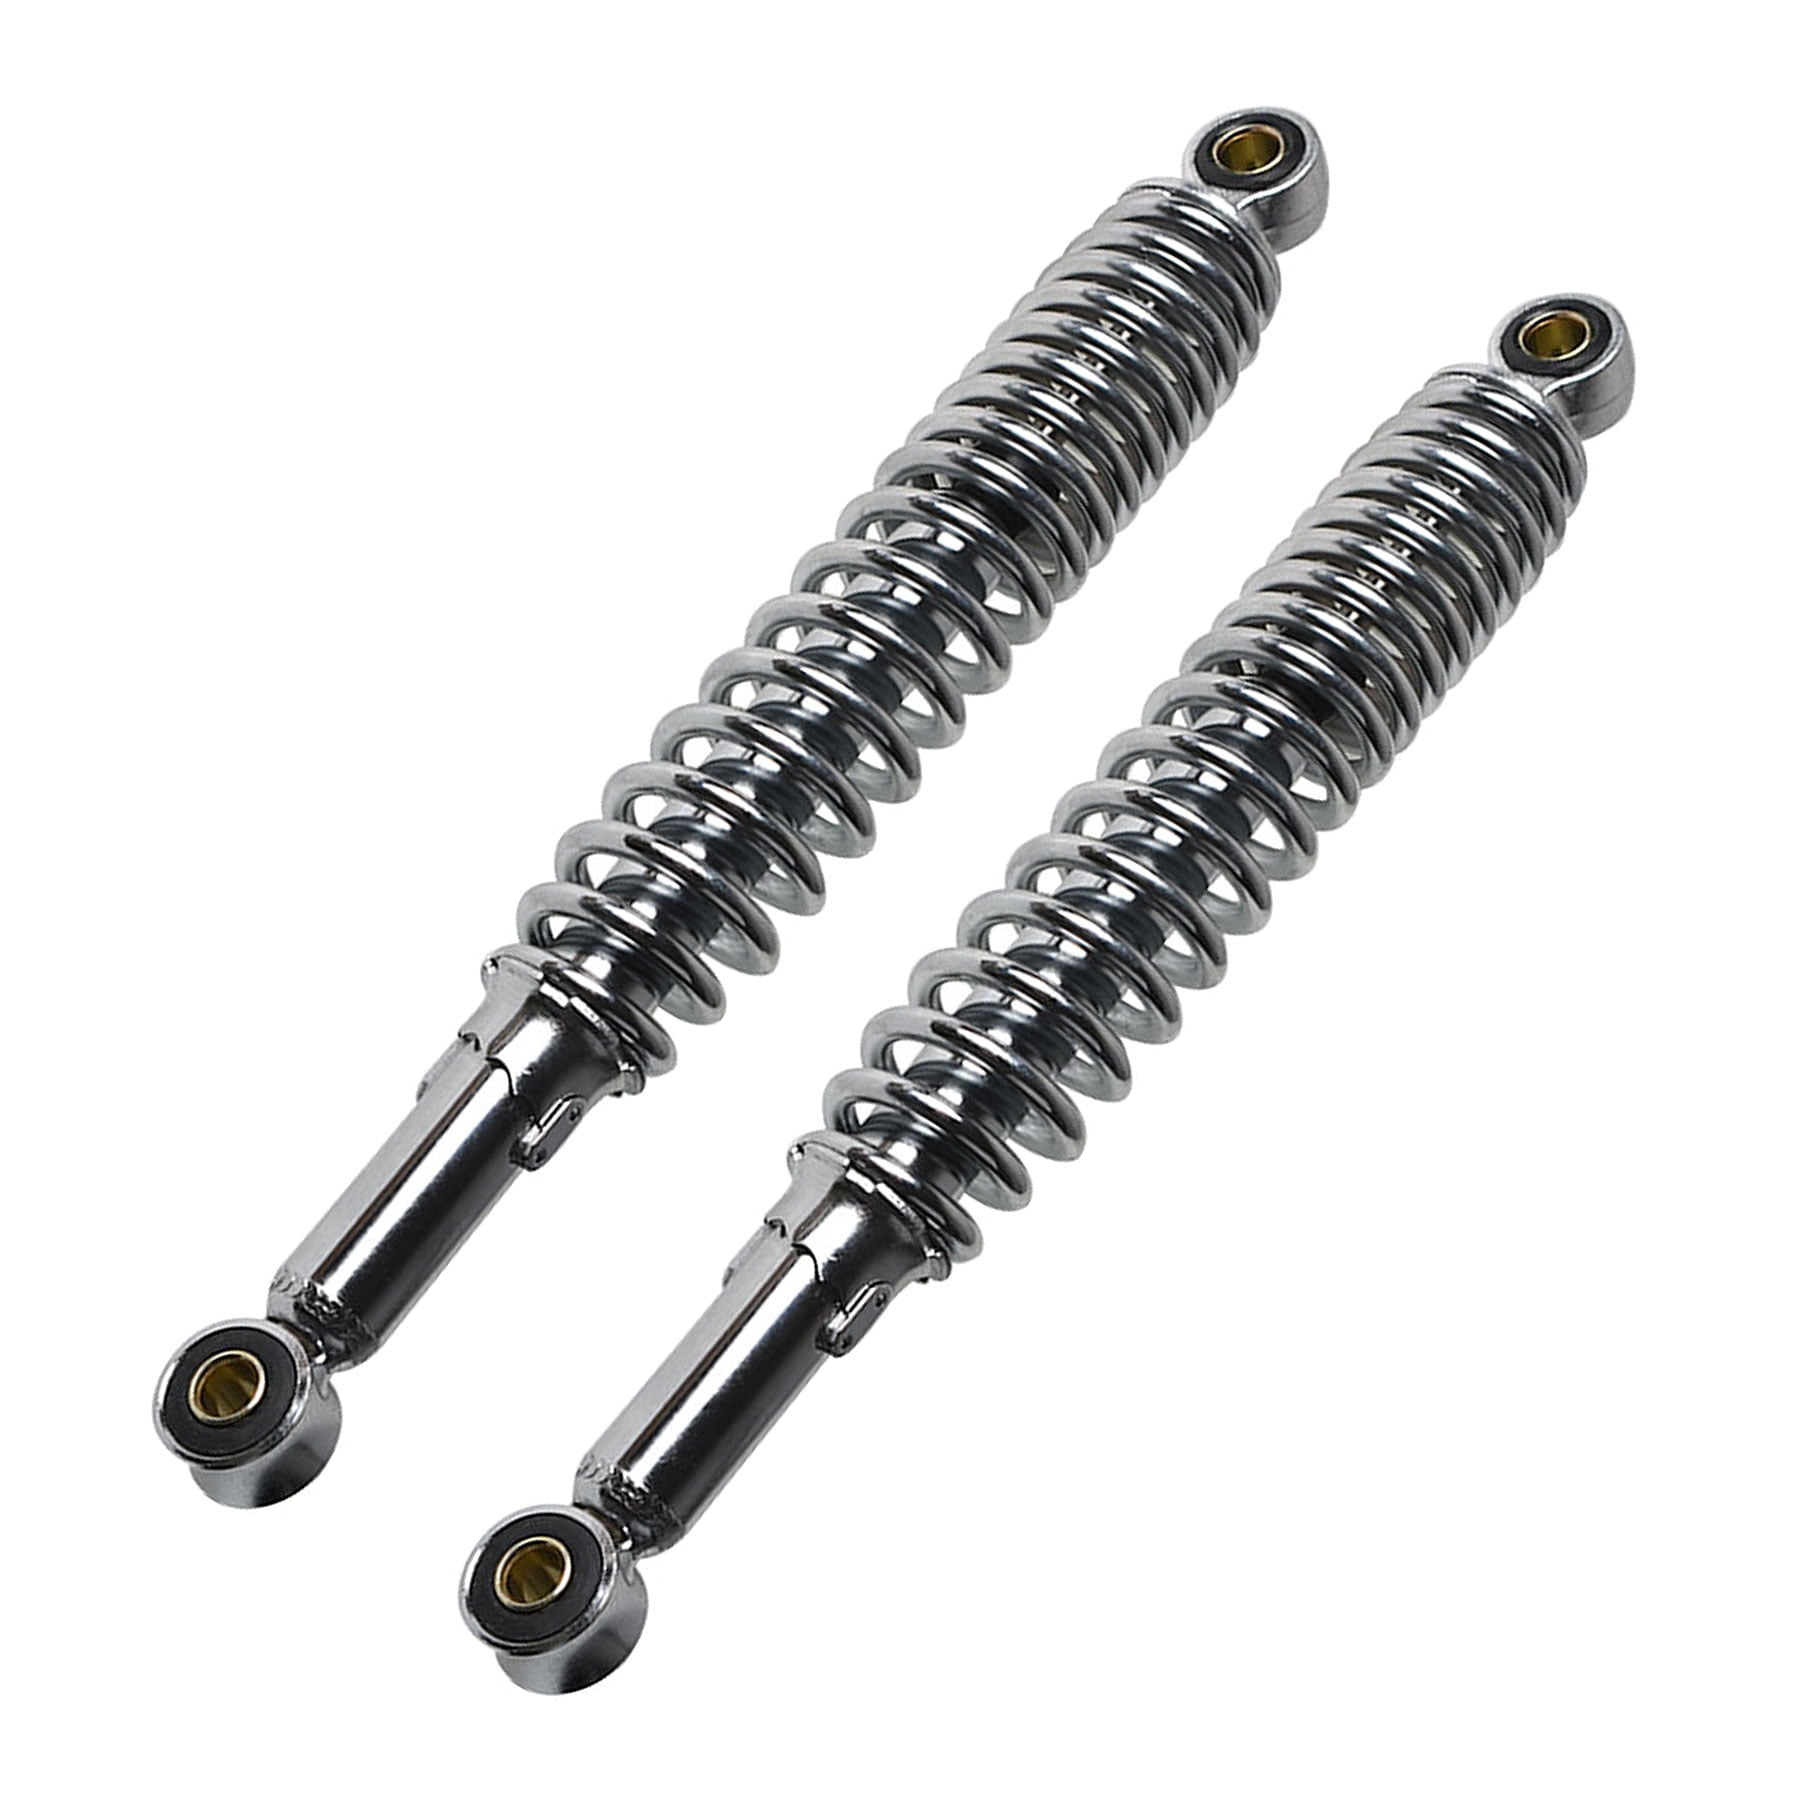 Eye To Eye 13 1/8 - Compatible with Honda S65 CL/CT70 XL75 CL/CT/CM/S90 CM91 CT110 Chrome Shocks 335mm 